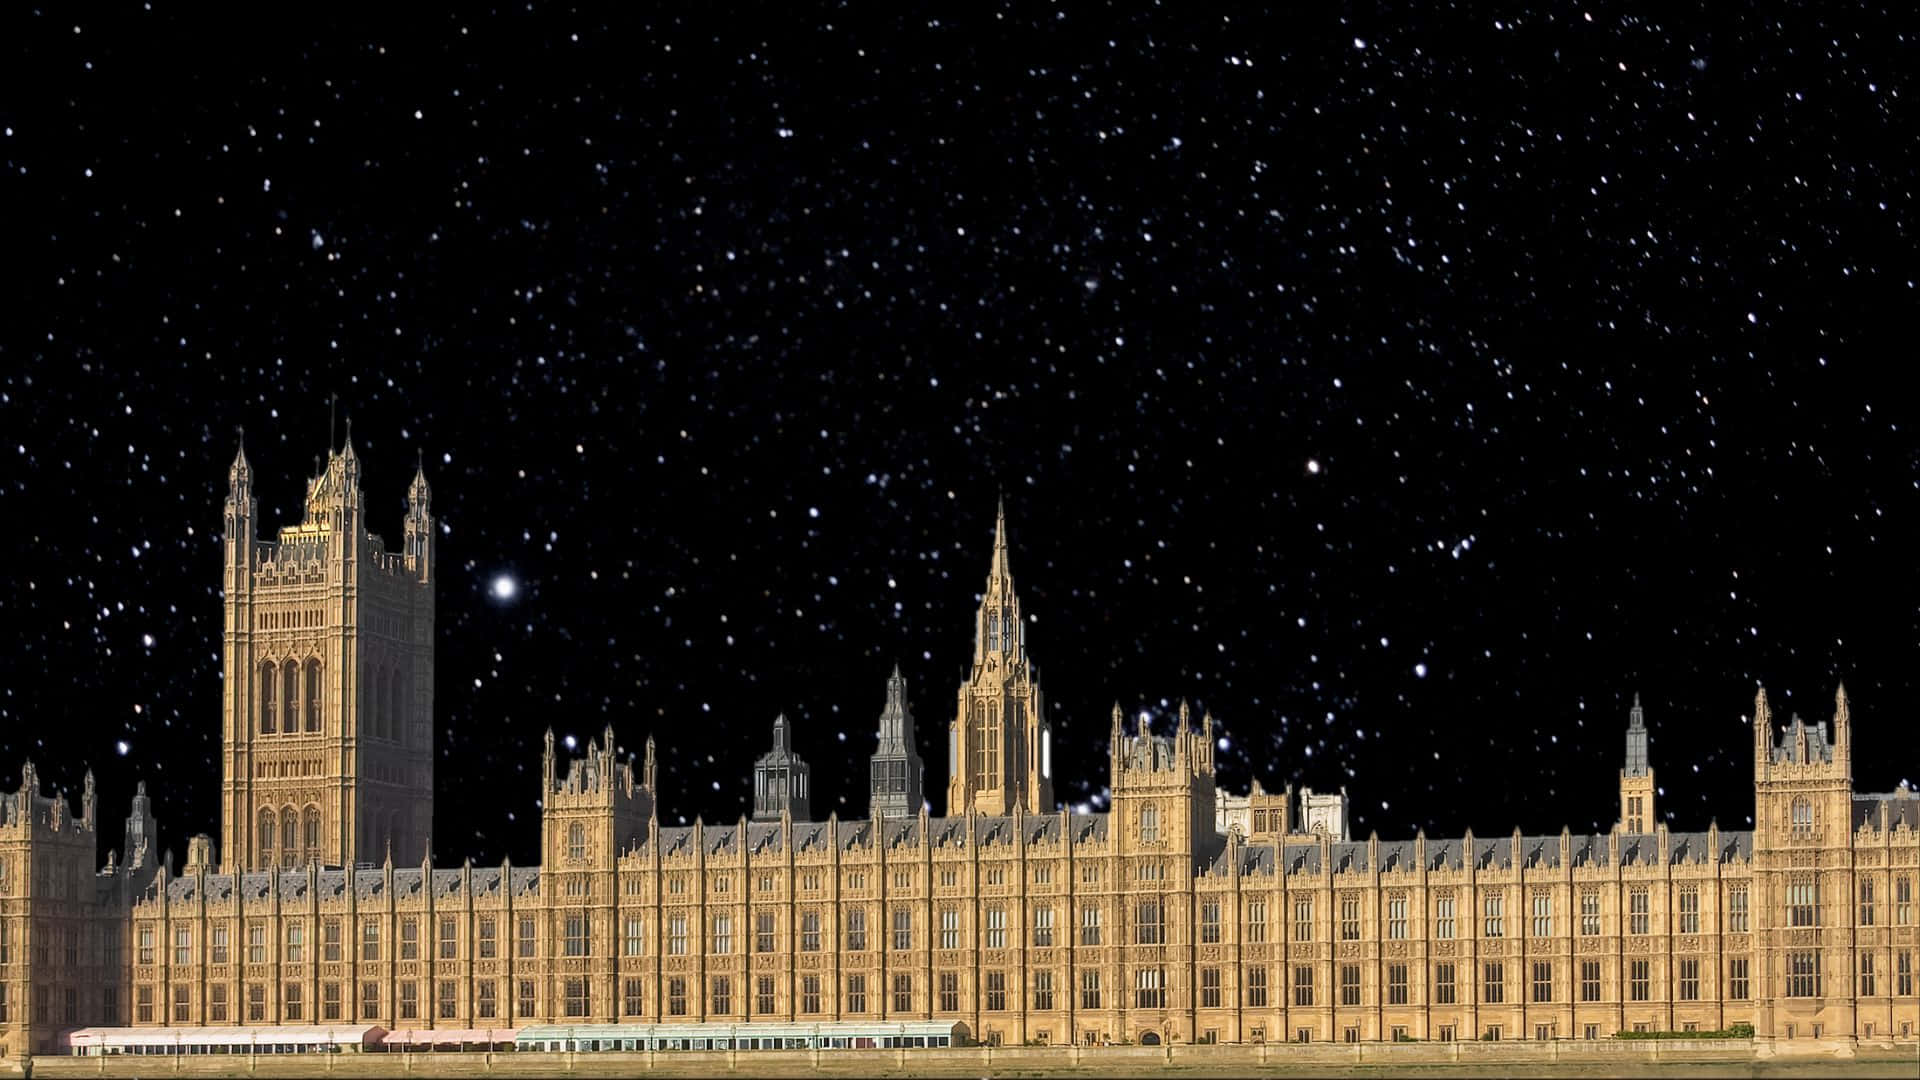 The spectacular nighttime lights of central London